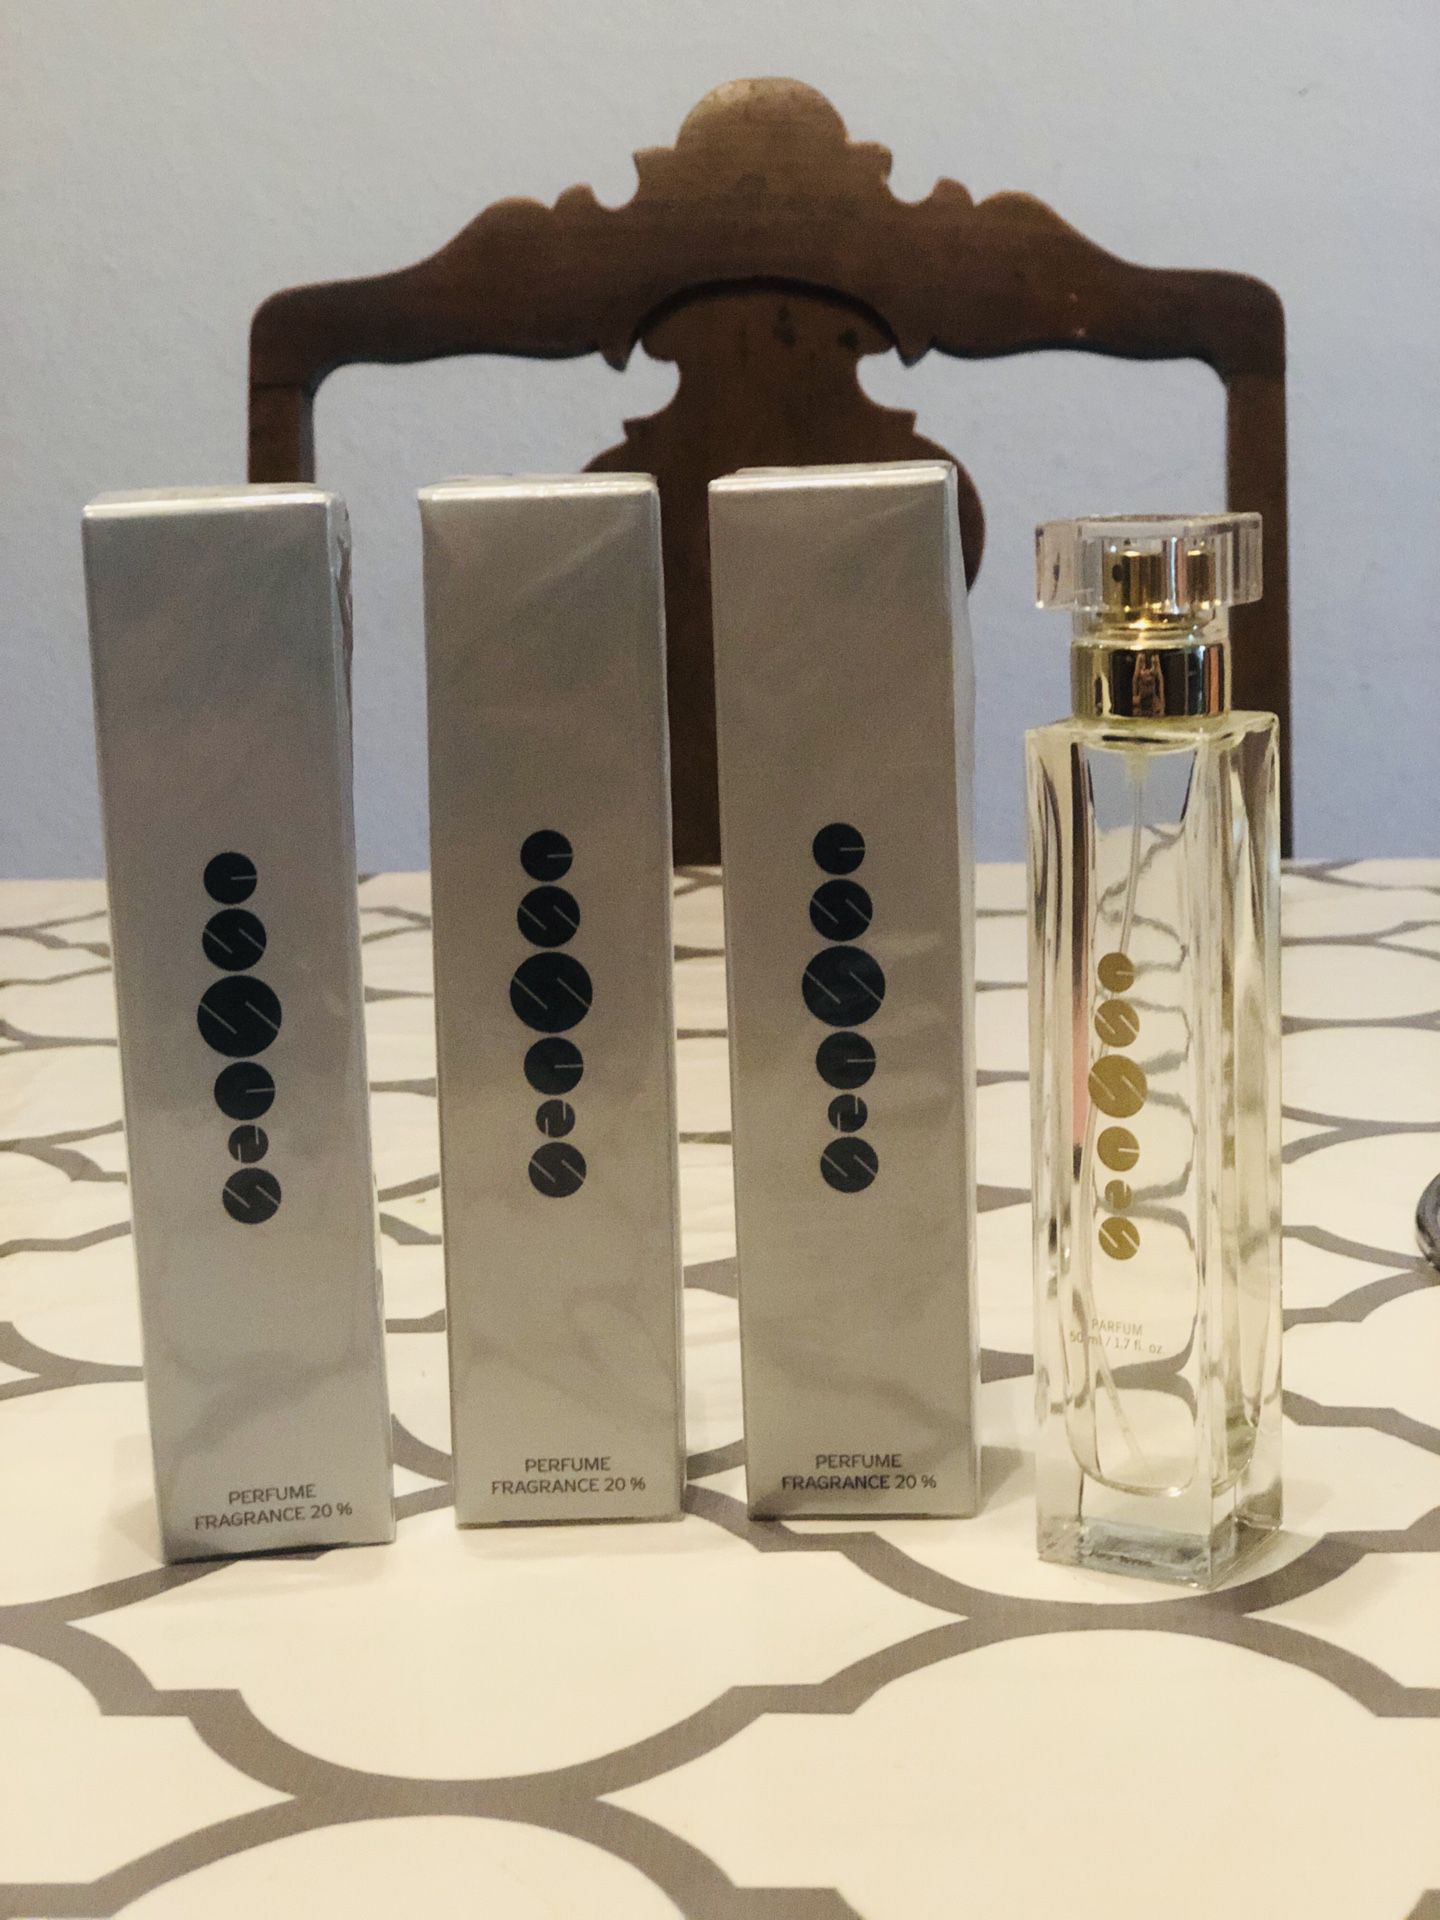 Perfume from Essens